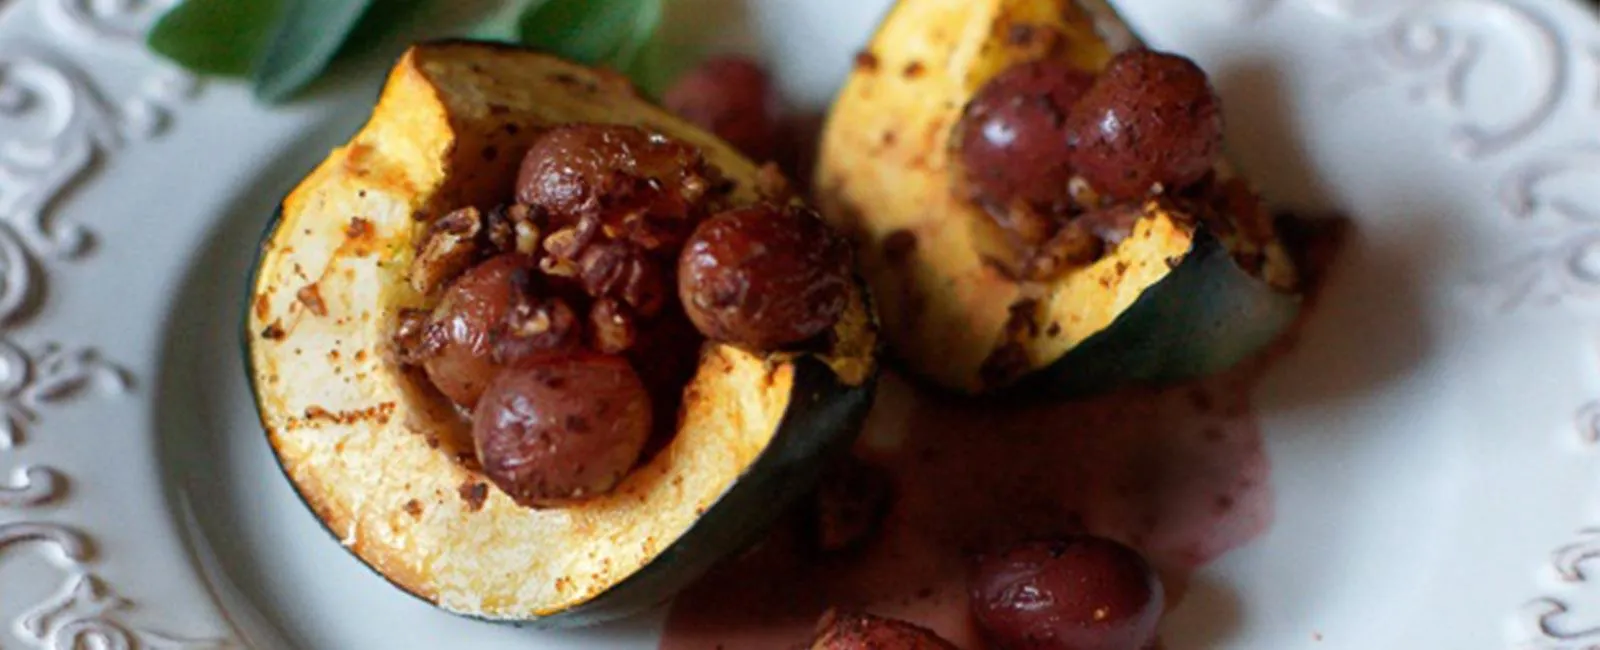 Roasted Acorn Squash and Grapes with Walnuts 